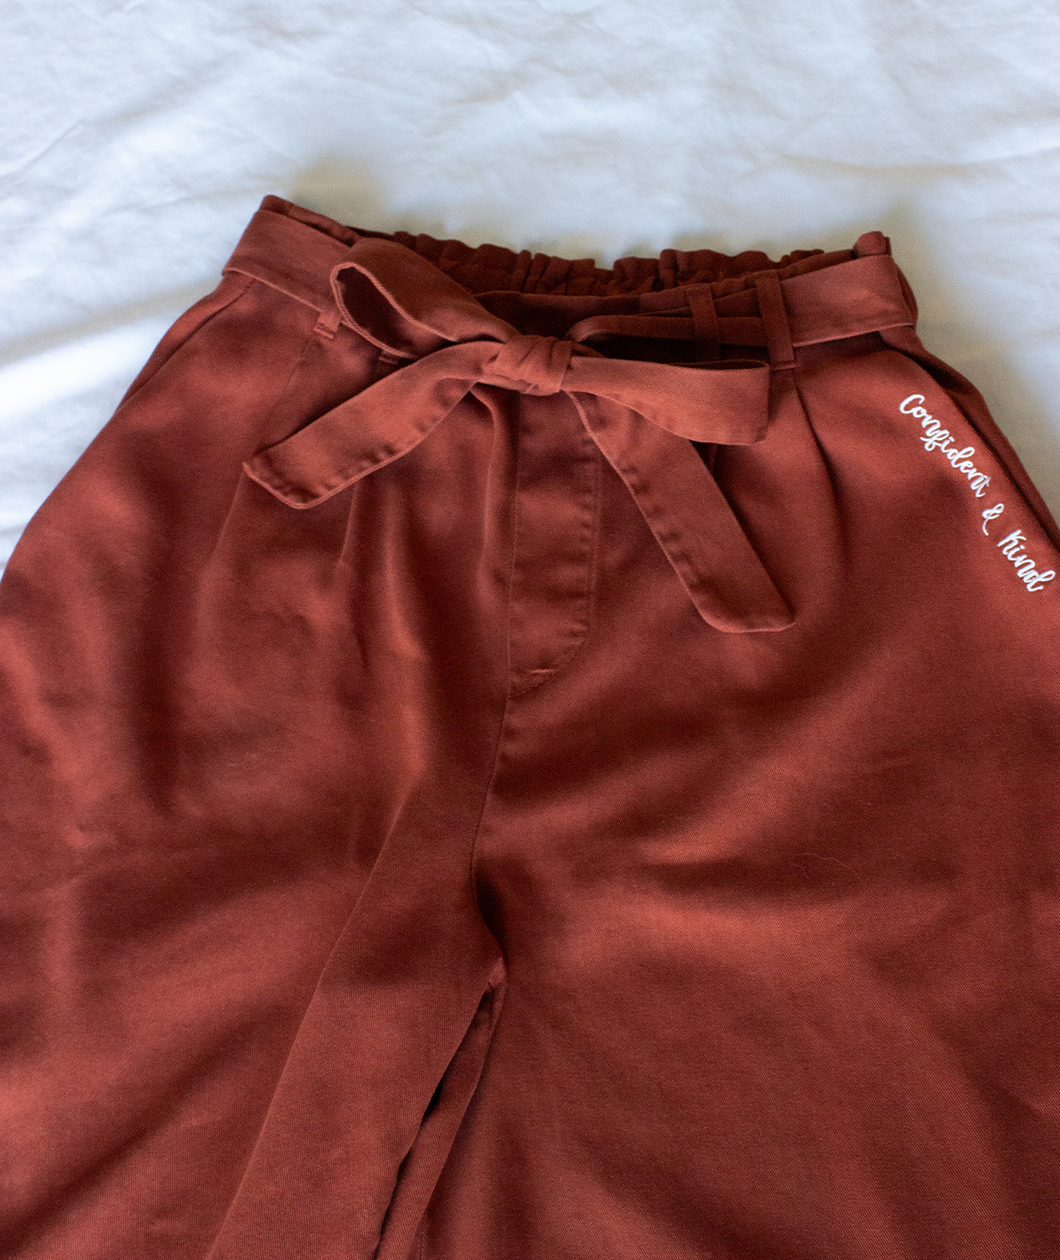 Copper colored pants with a copper colored belt tied in a knot. “Confident & Kind” is in white curisve font along the lefthand pocket - from Sierra Schultzzie